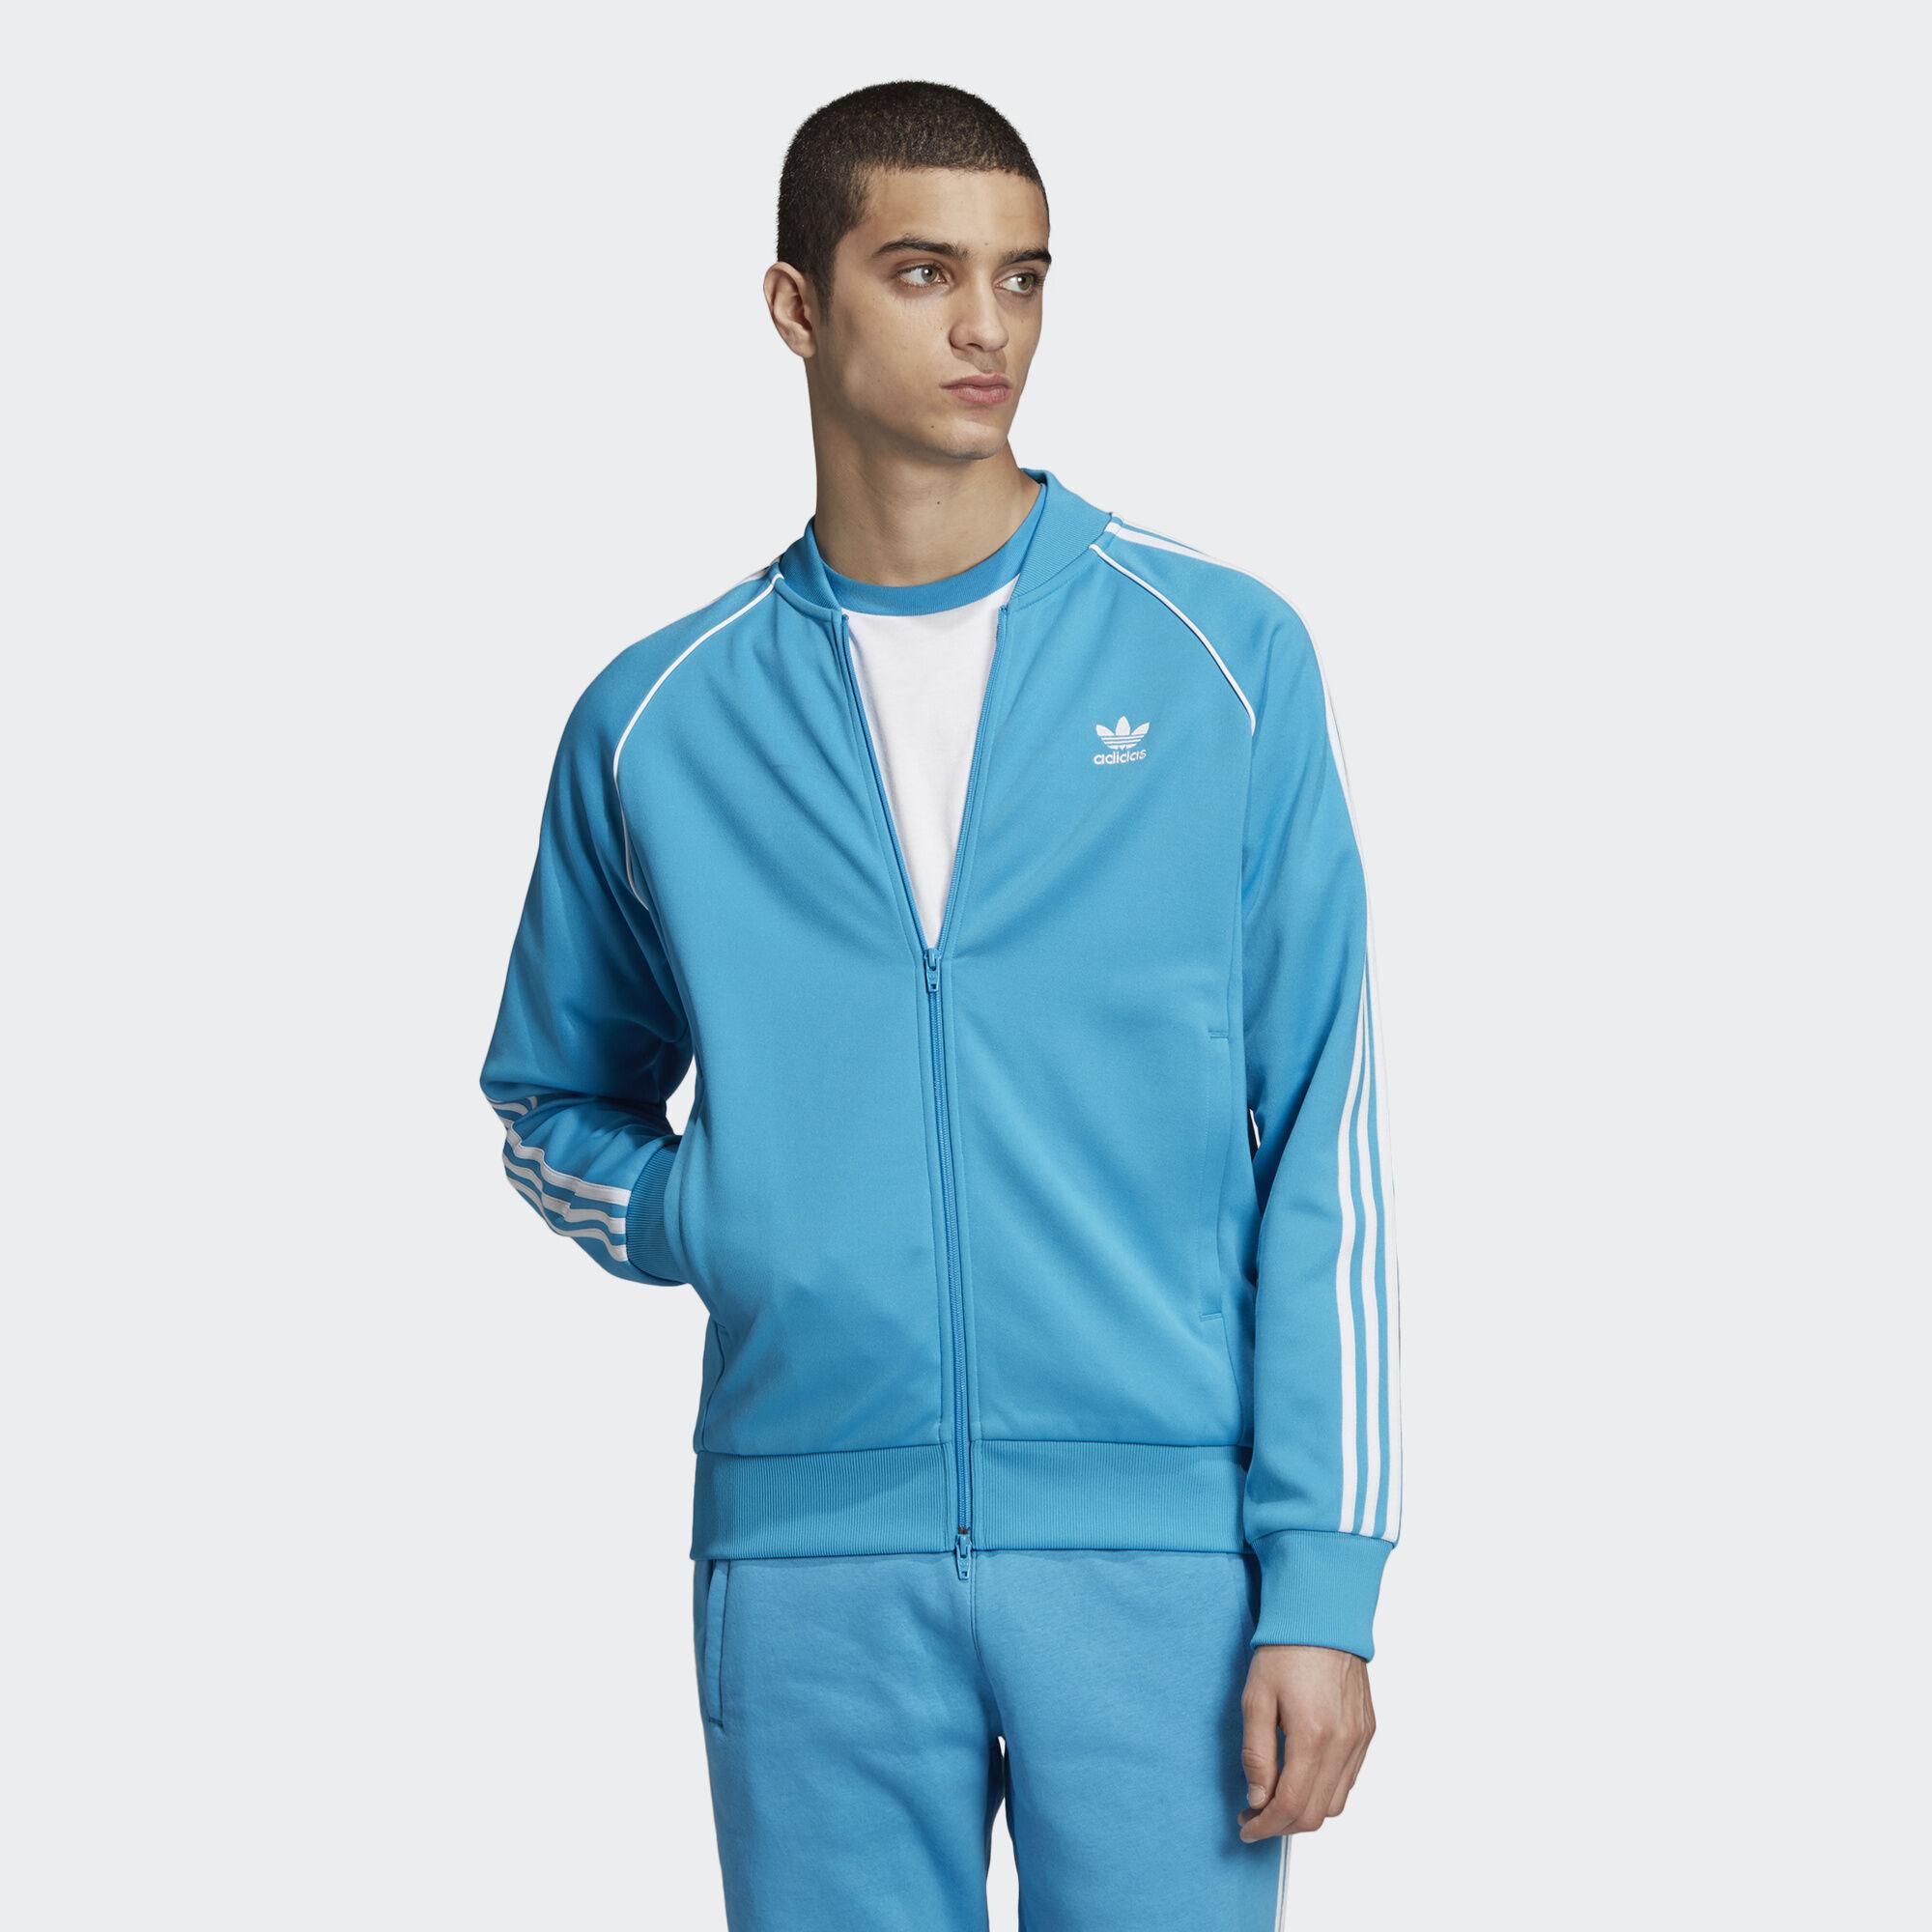 adidas Sst Track Top in Blue for Men - Lyst